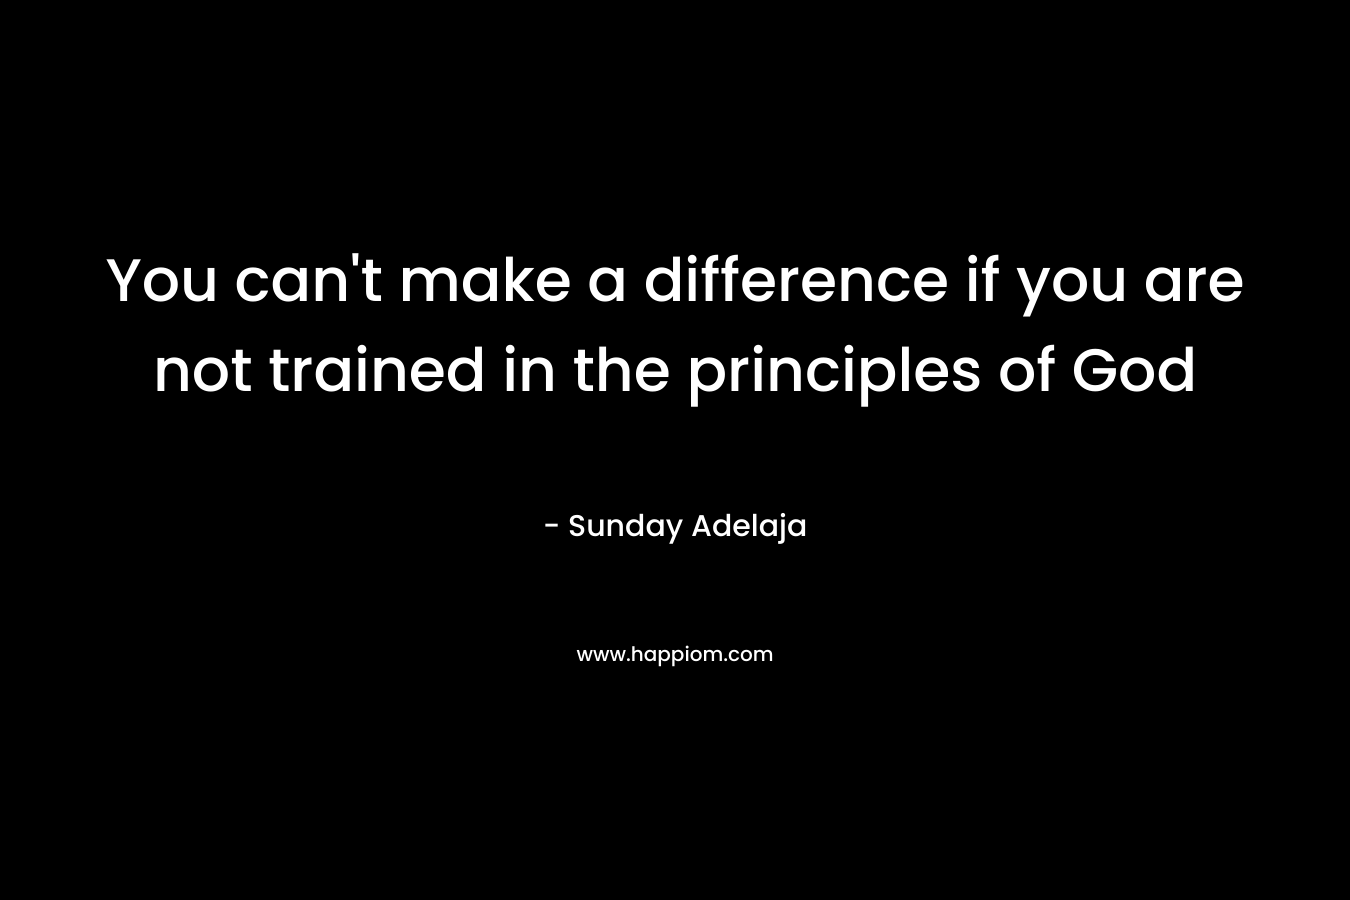 You can't make a difference if you are not trained in the principles of God